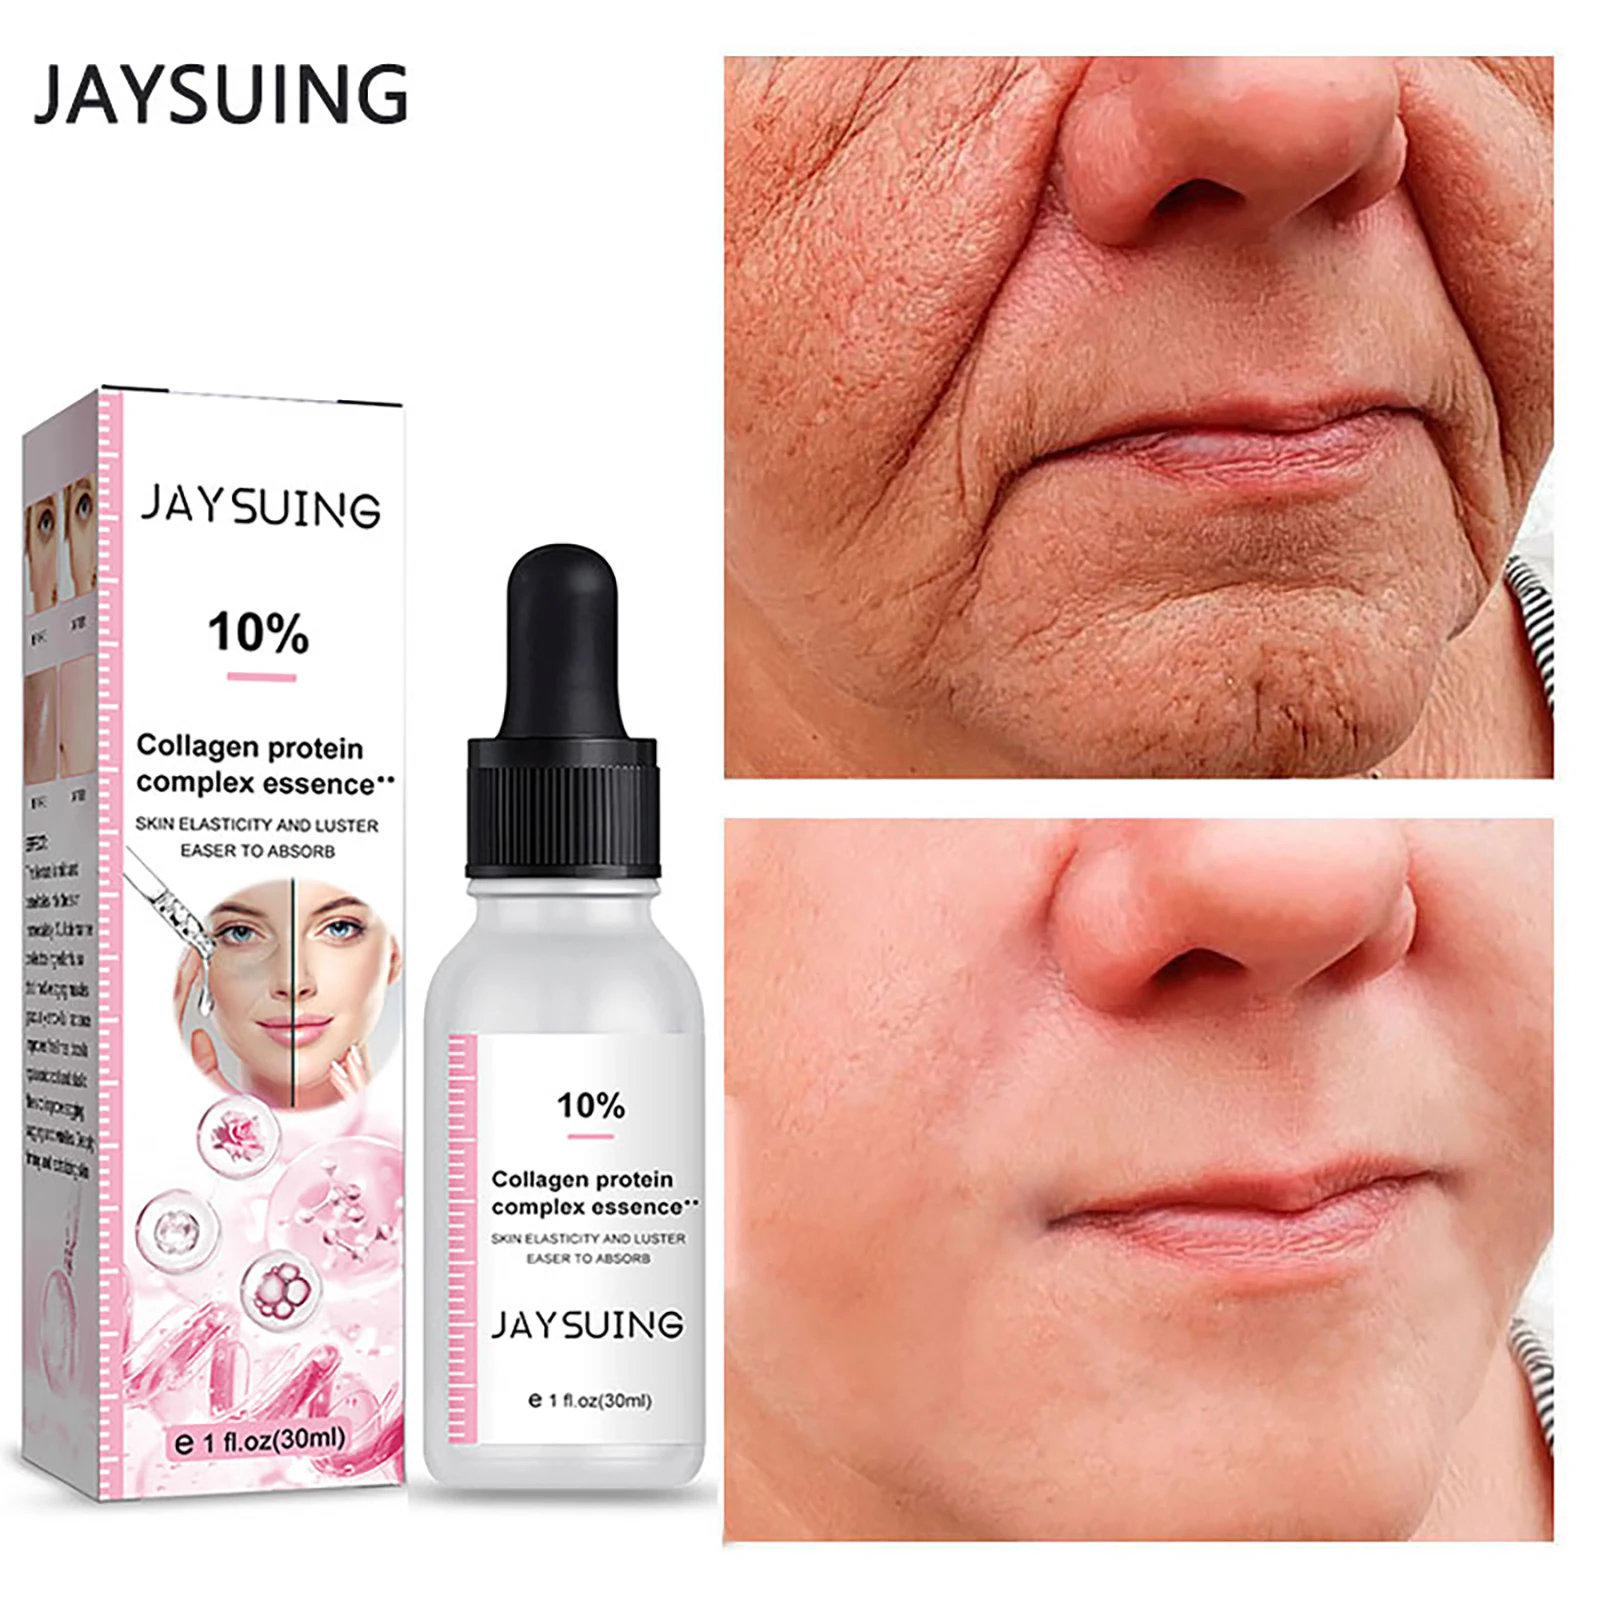 

Collagen Anti-Wrinkle Essence Shrink Pores Fade Fine Lines Firming Skin Anti-aging Hyaluronic Moisturize Acne Repair Serum 30ml